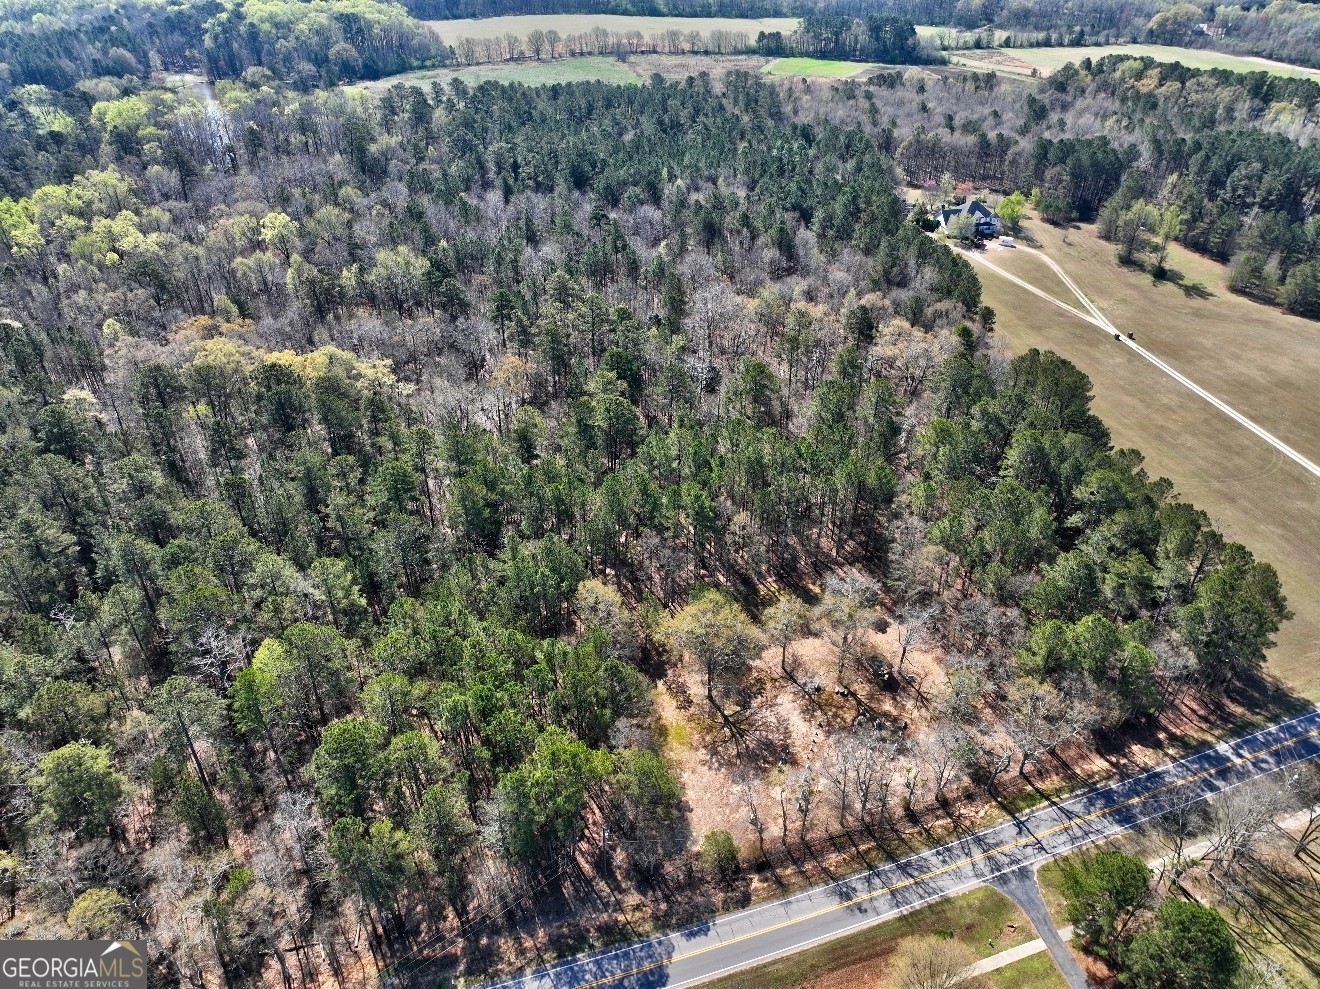 3. 205 Highway 186 Tract 2